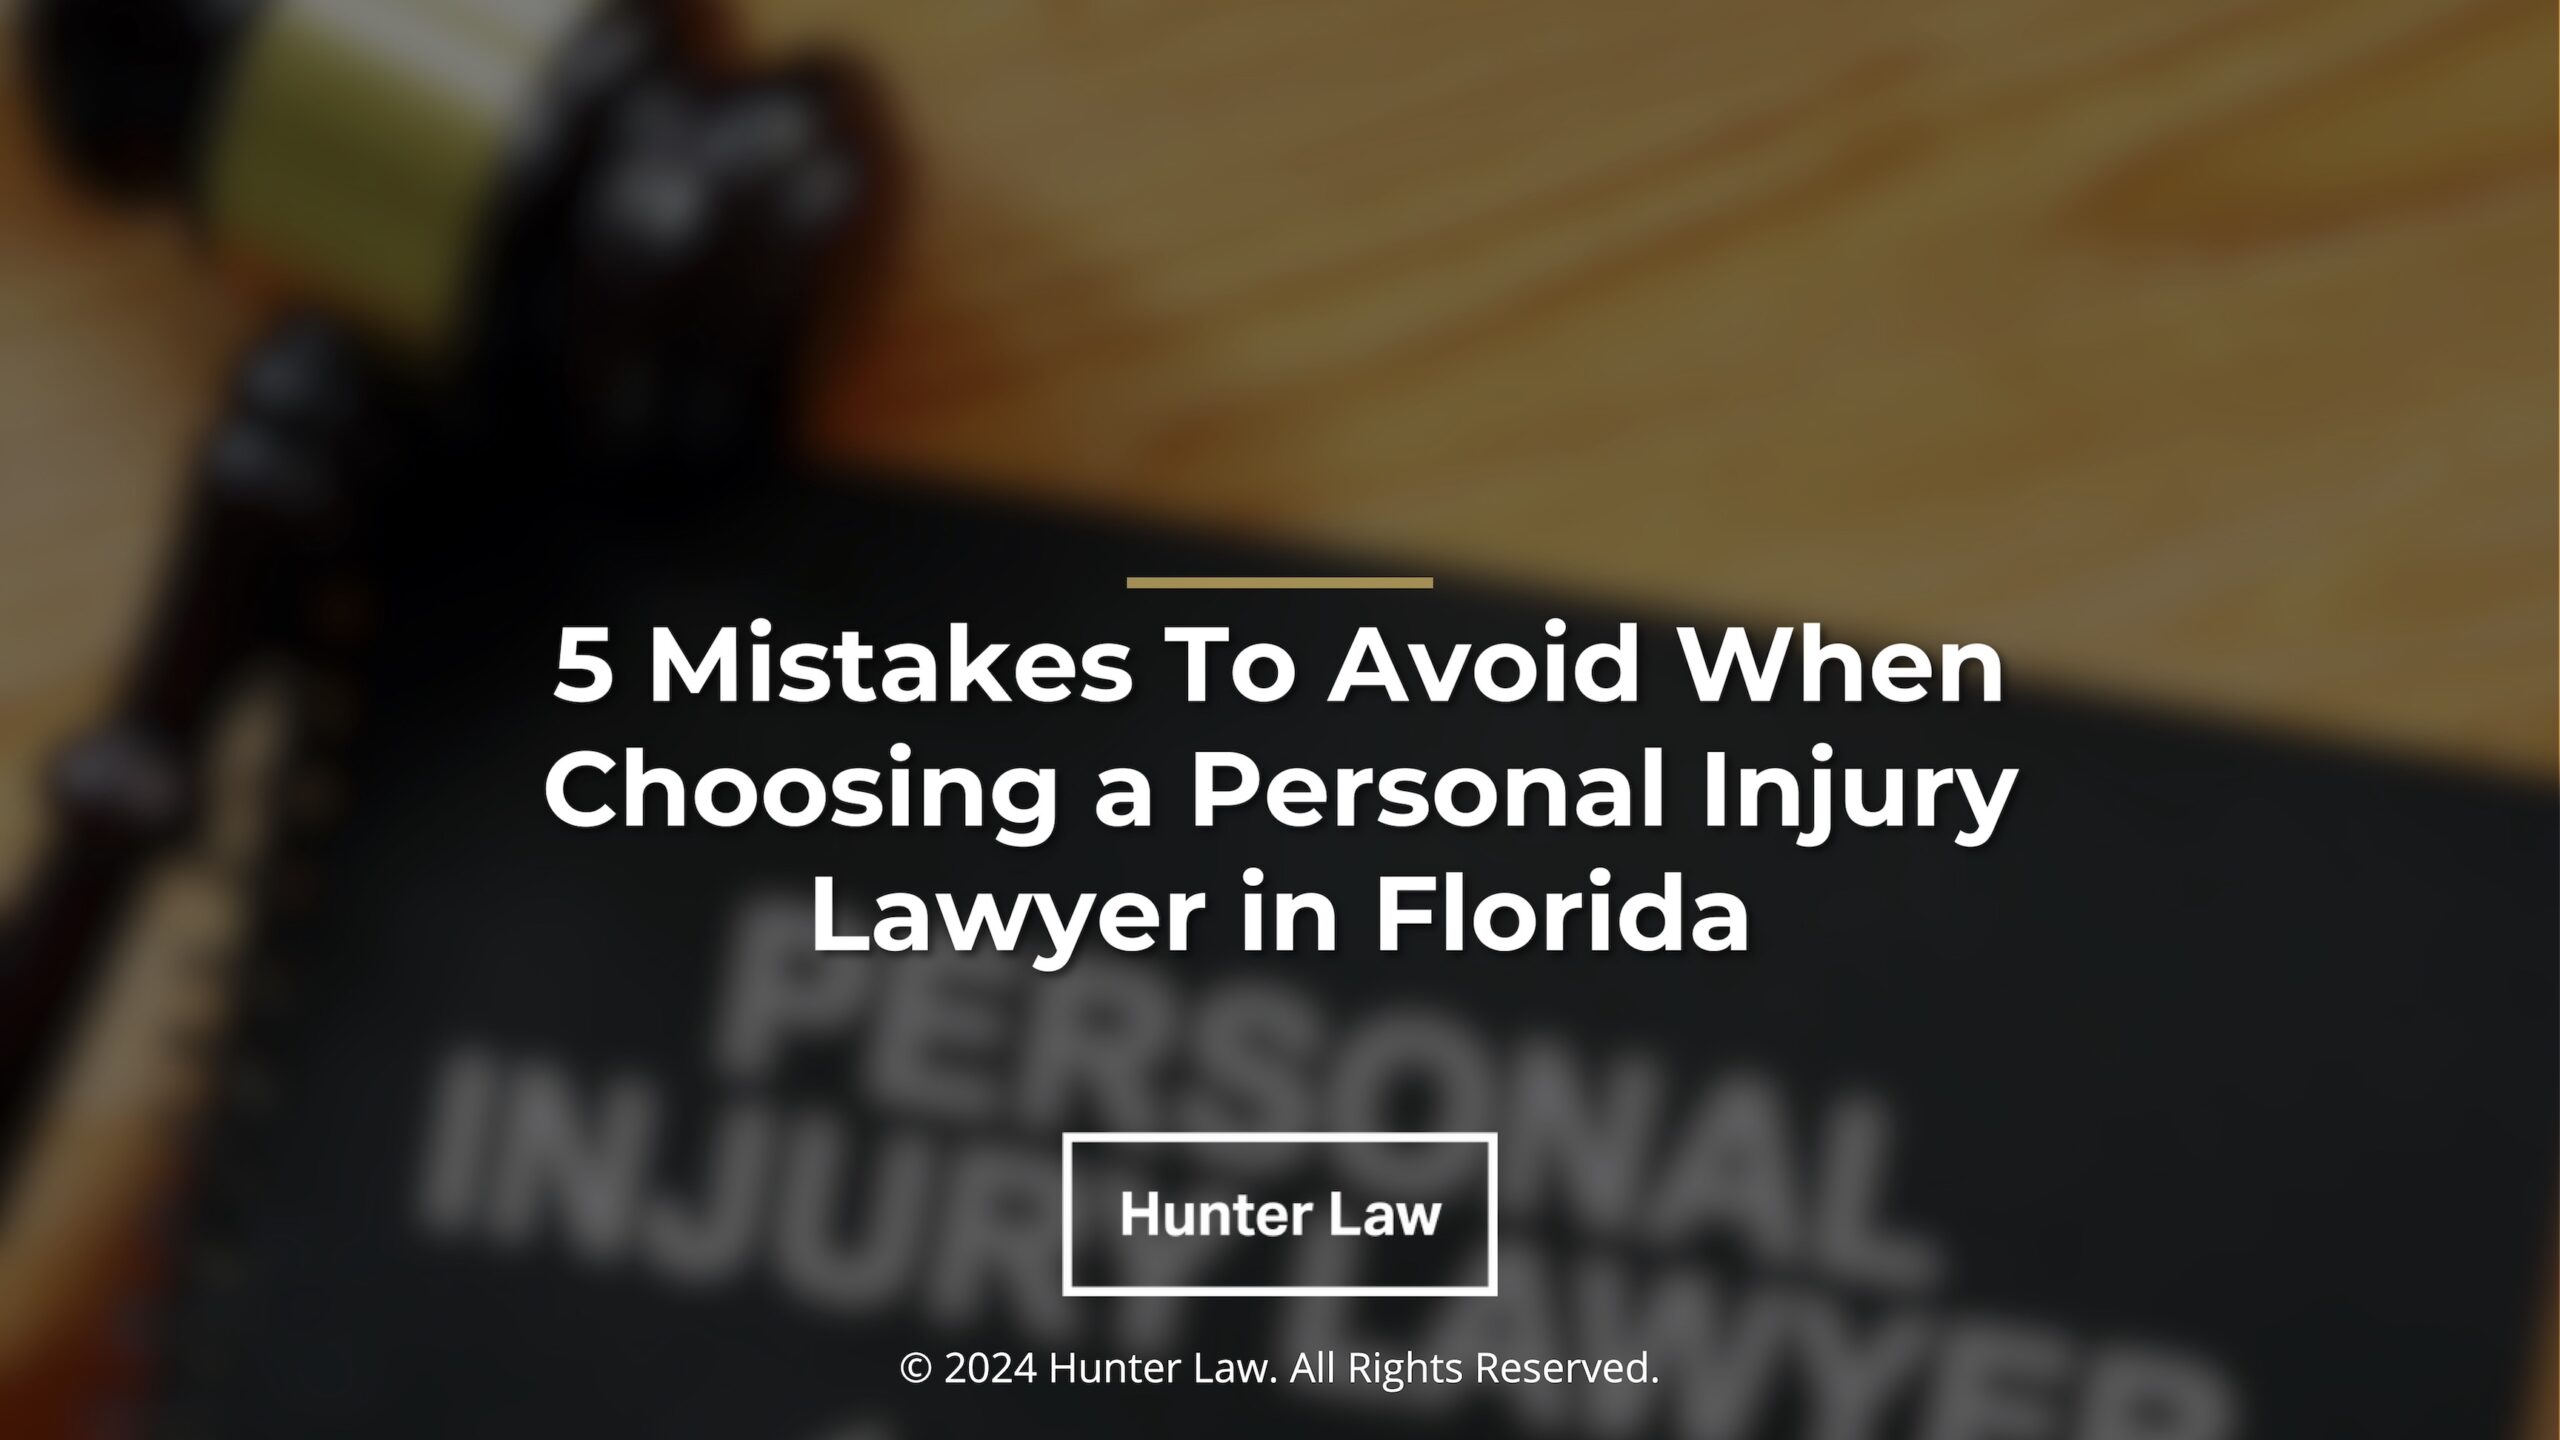 Featured: Notebook with Personal Injury Lawyer printed on front- 5 mistakes to avoid when choosing a personal injury lawyer in Florida